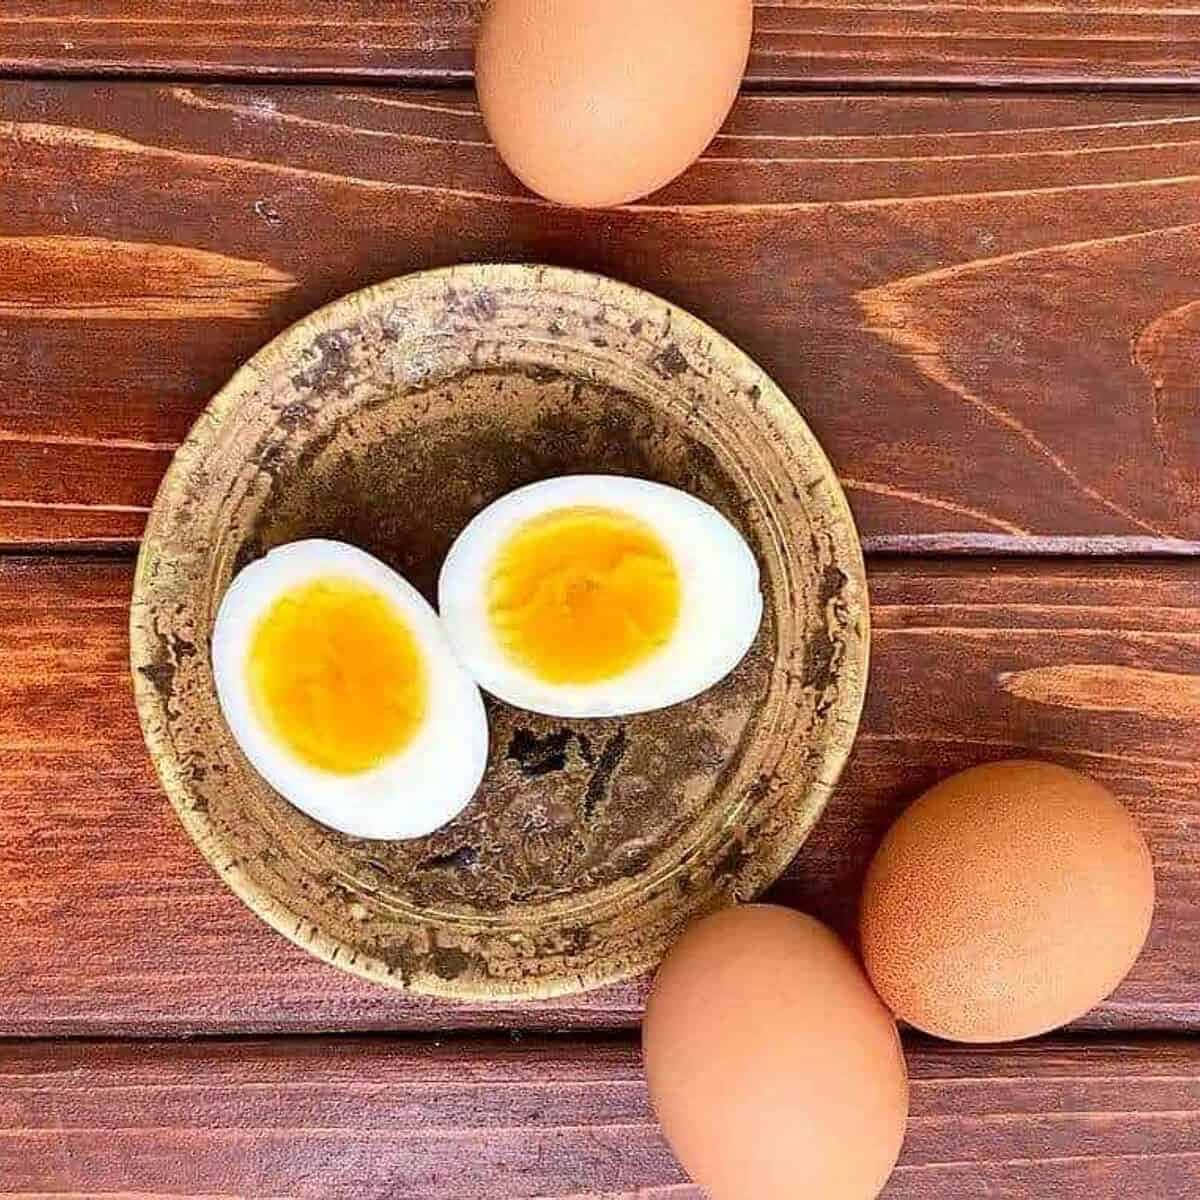 Unique Perspective of an Egg